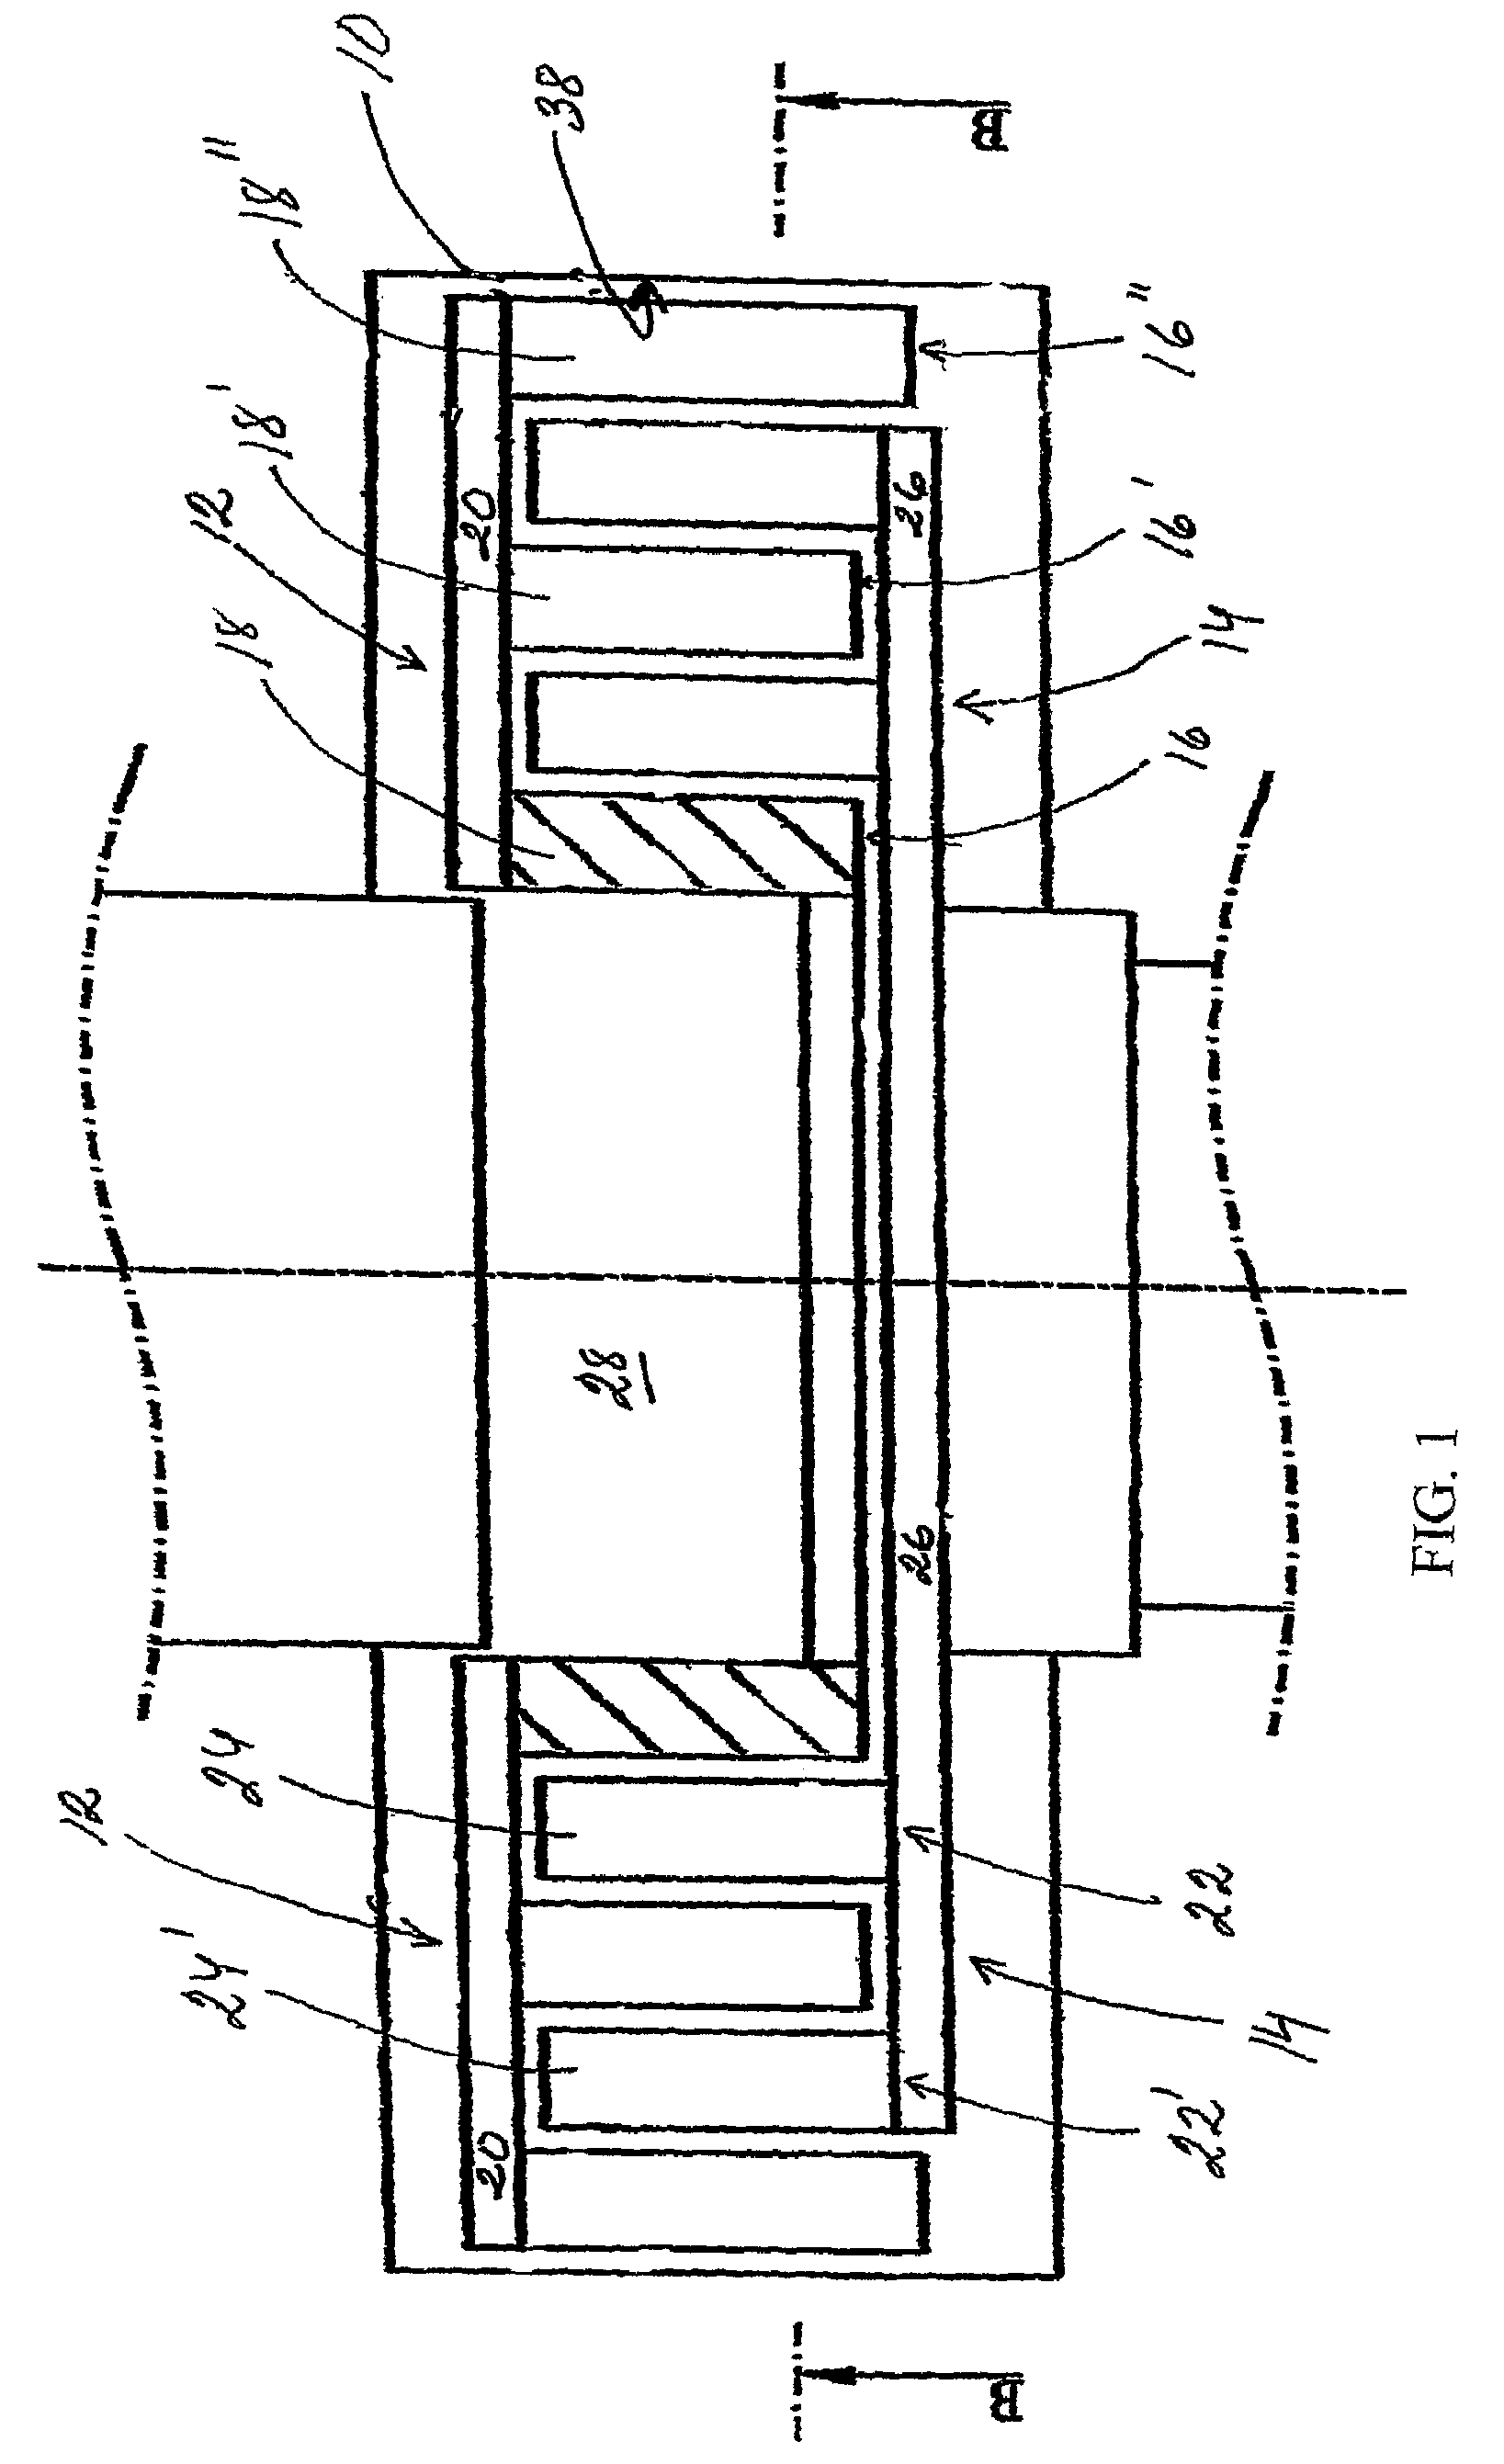 Method and apparatus for treating materials or mixtures of materials